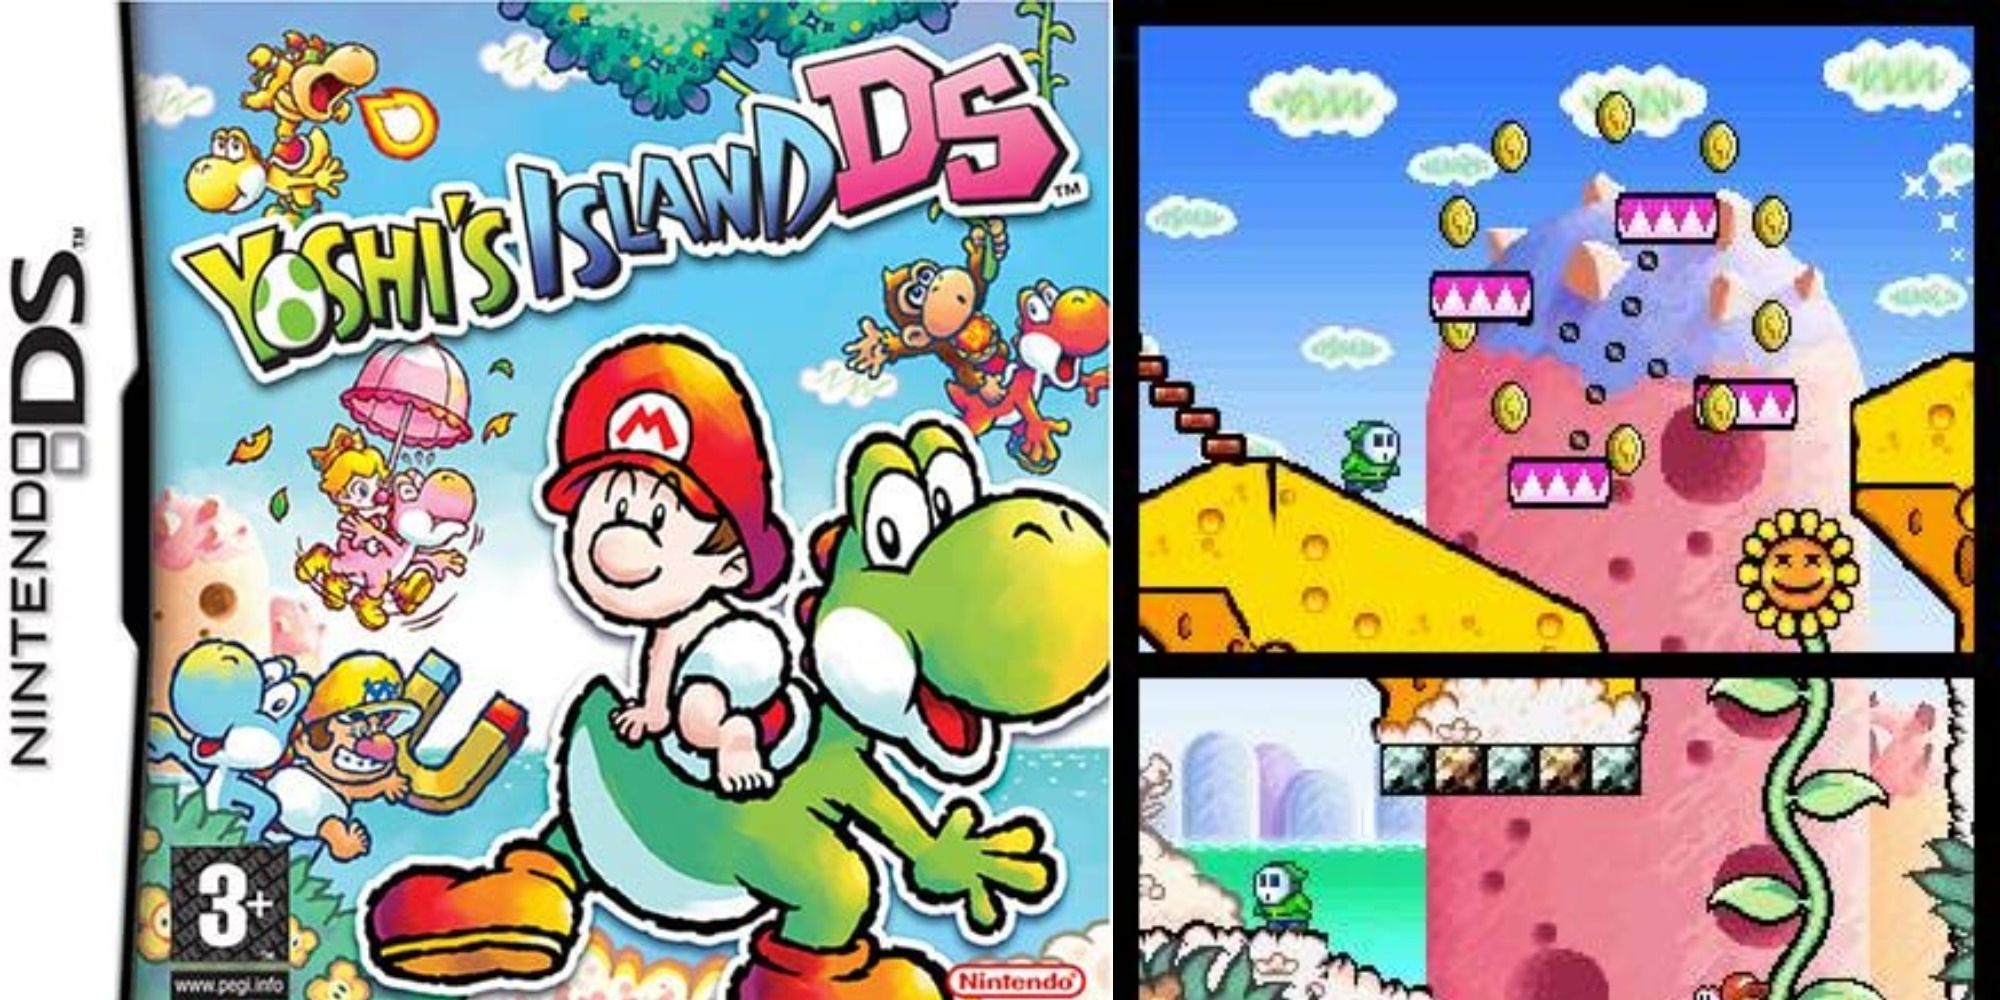 DS Games Yoshis Island